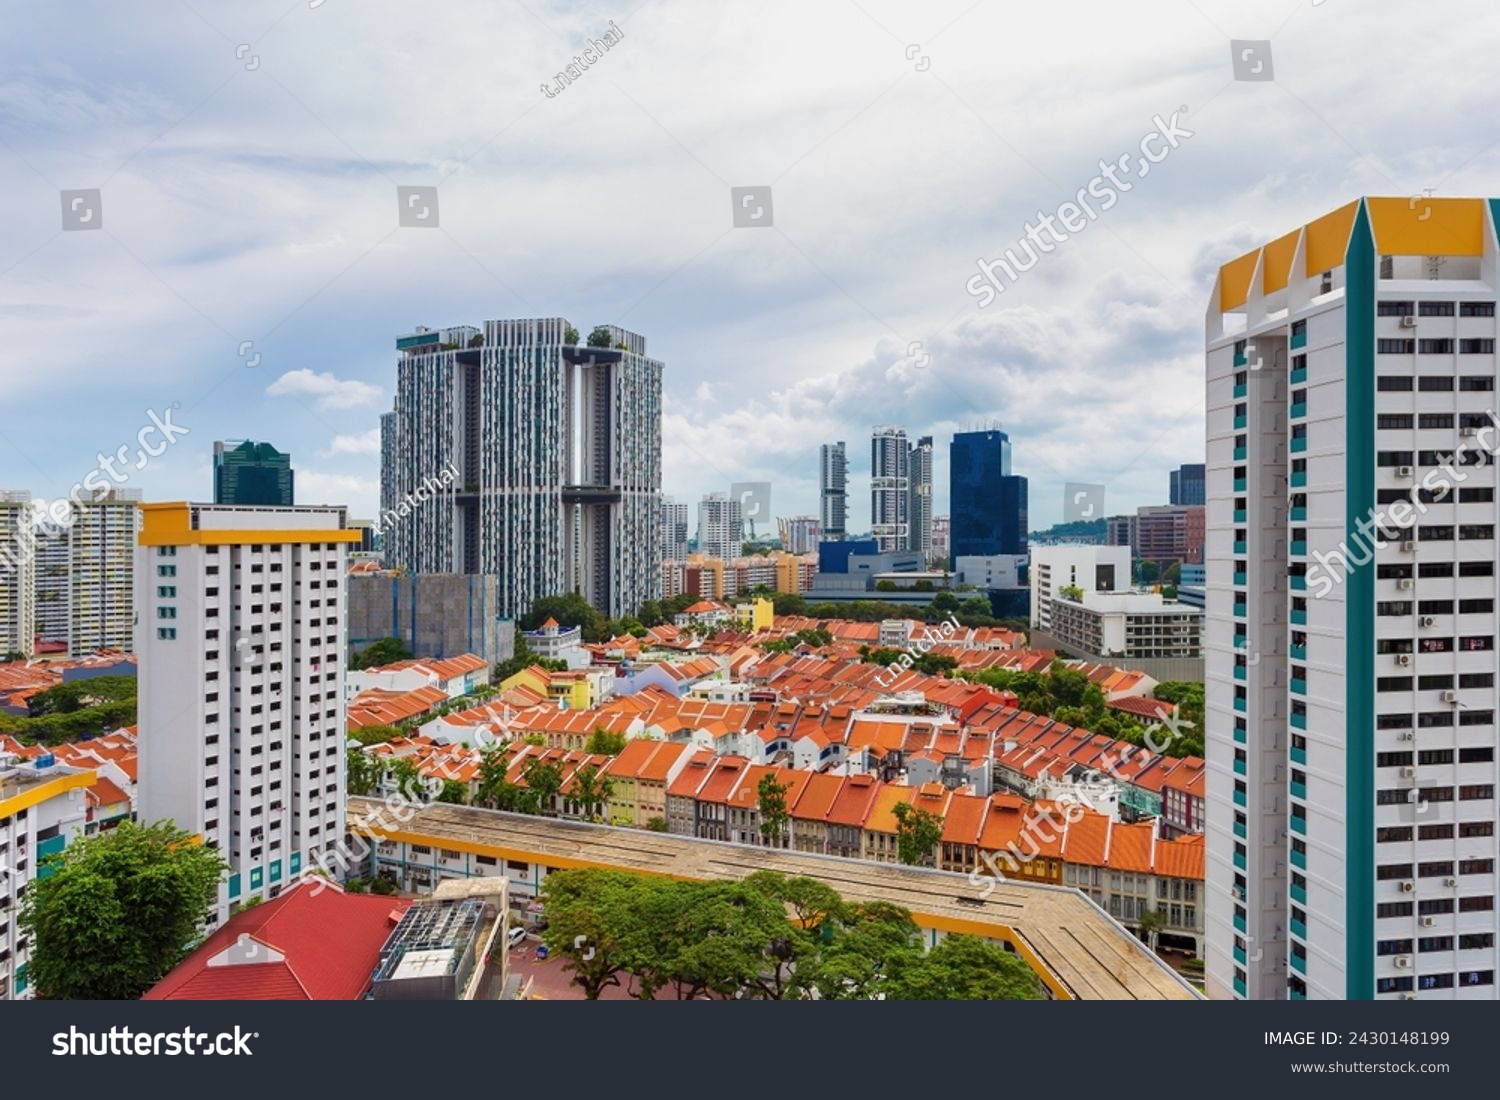 Modern and Traditional Skyline in Singapore, Contrast between historical shophouses and modern high-rise buildings in Singapore's dynamic urban landscape. #2430148199